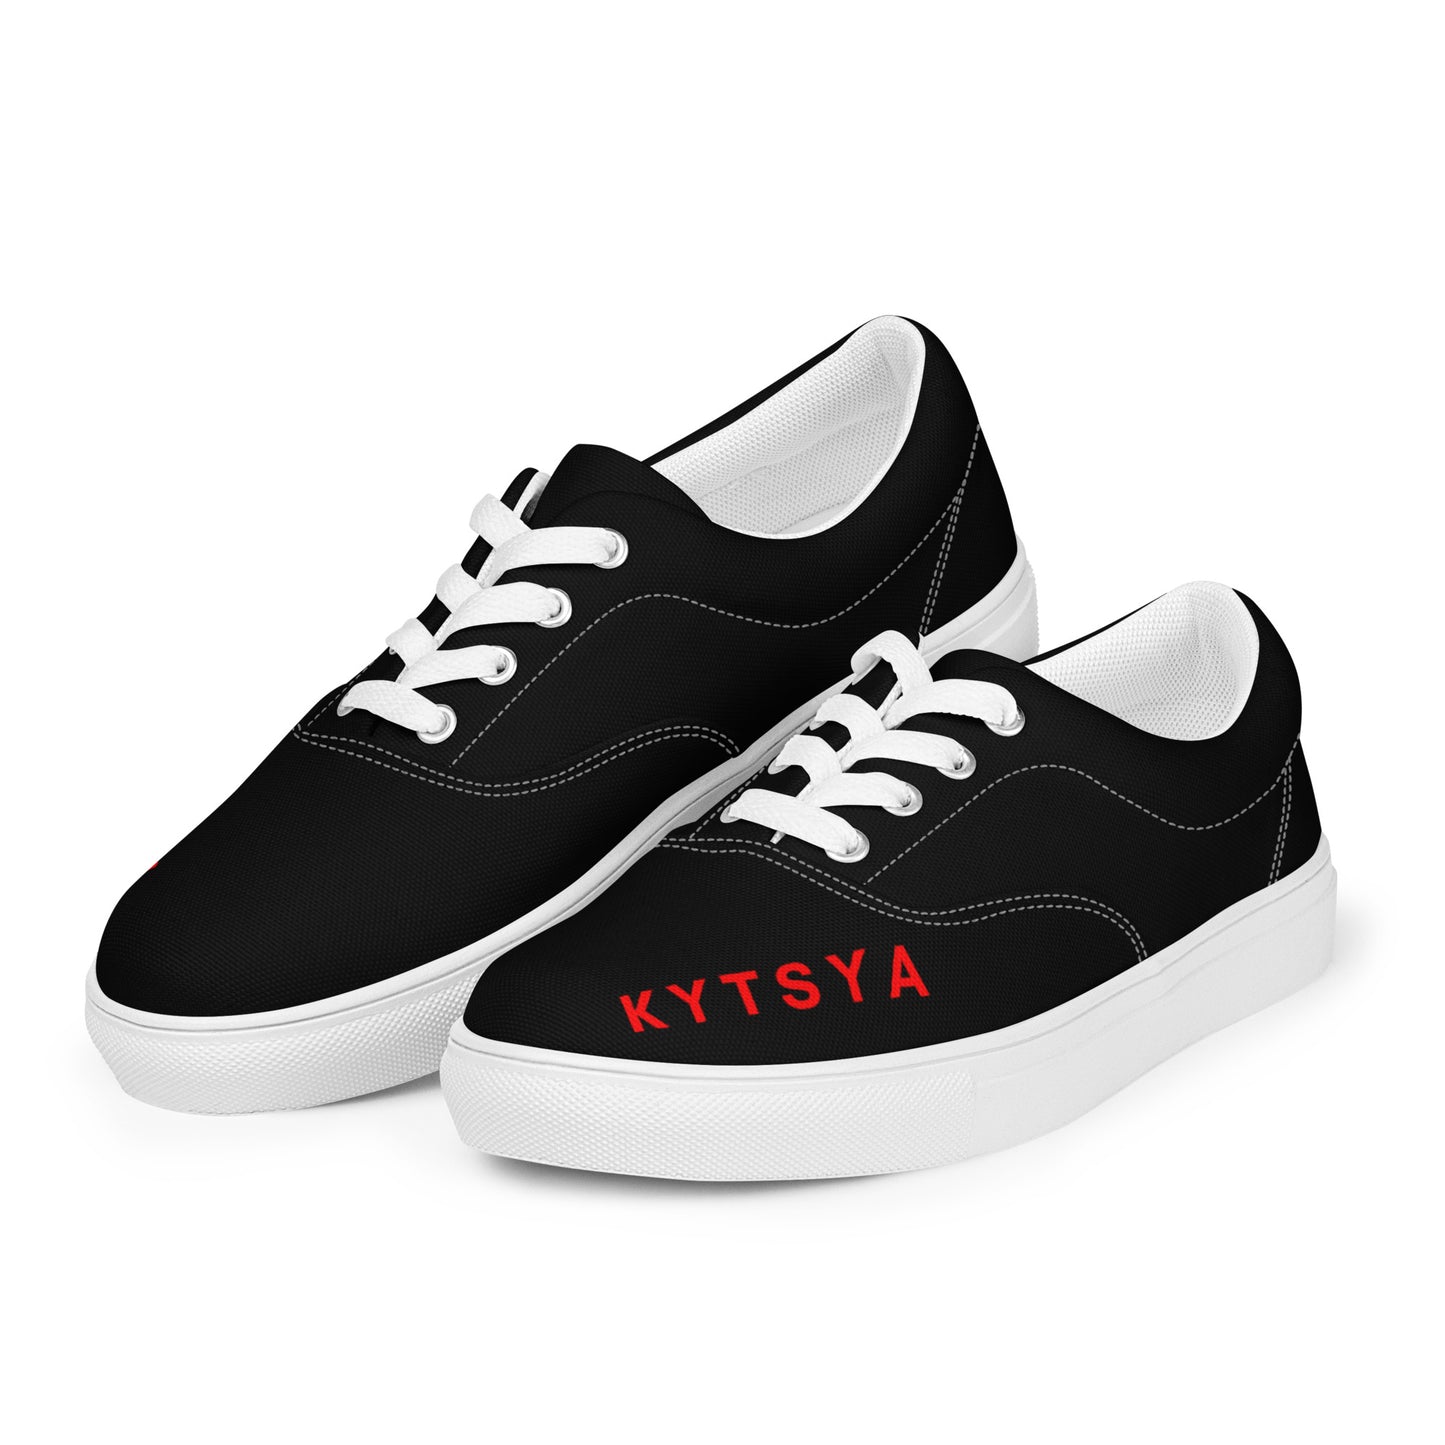 Red Weapon Kytsya lace-up canvas shoes